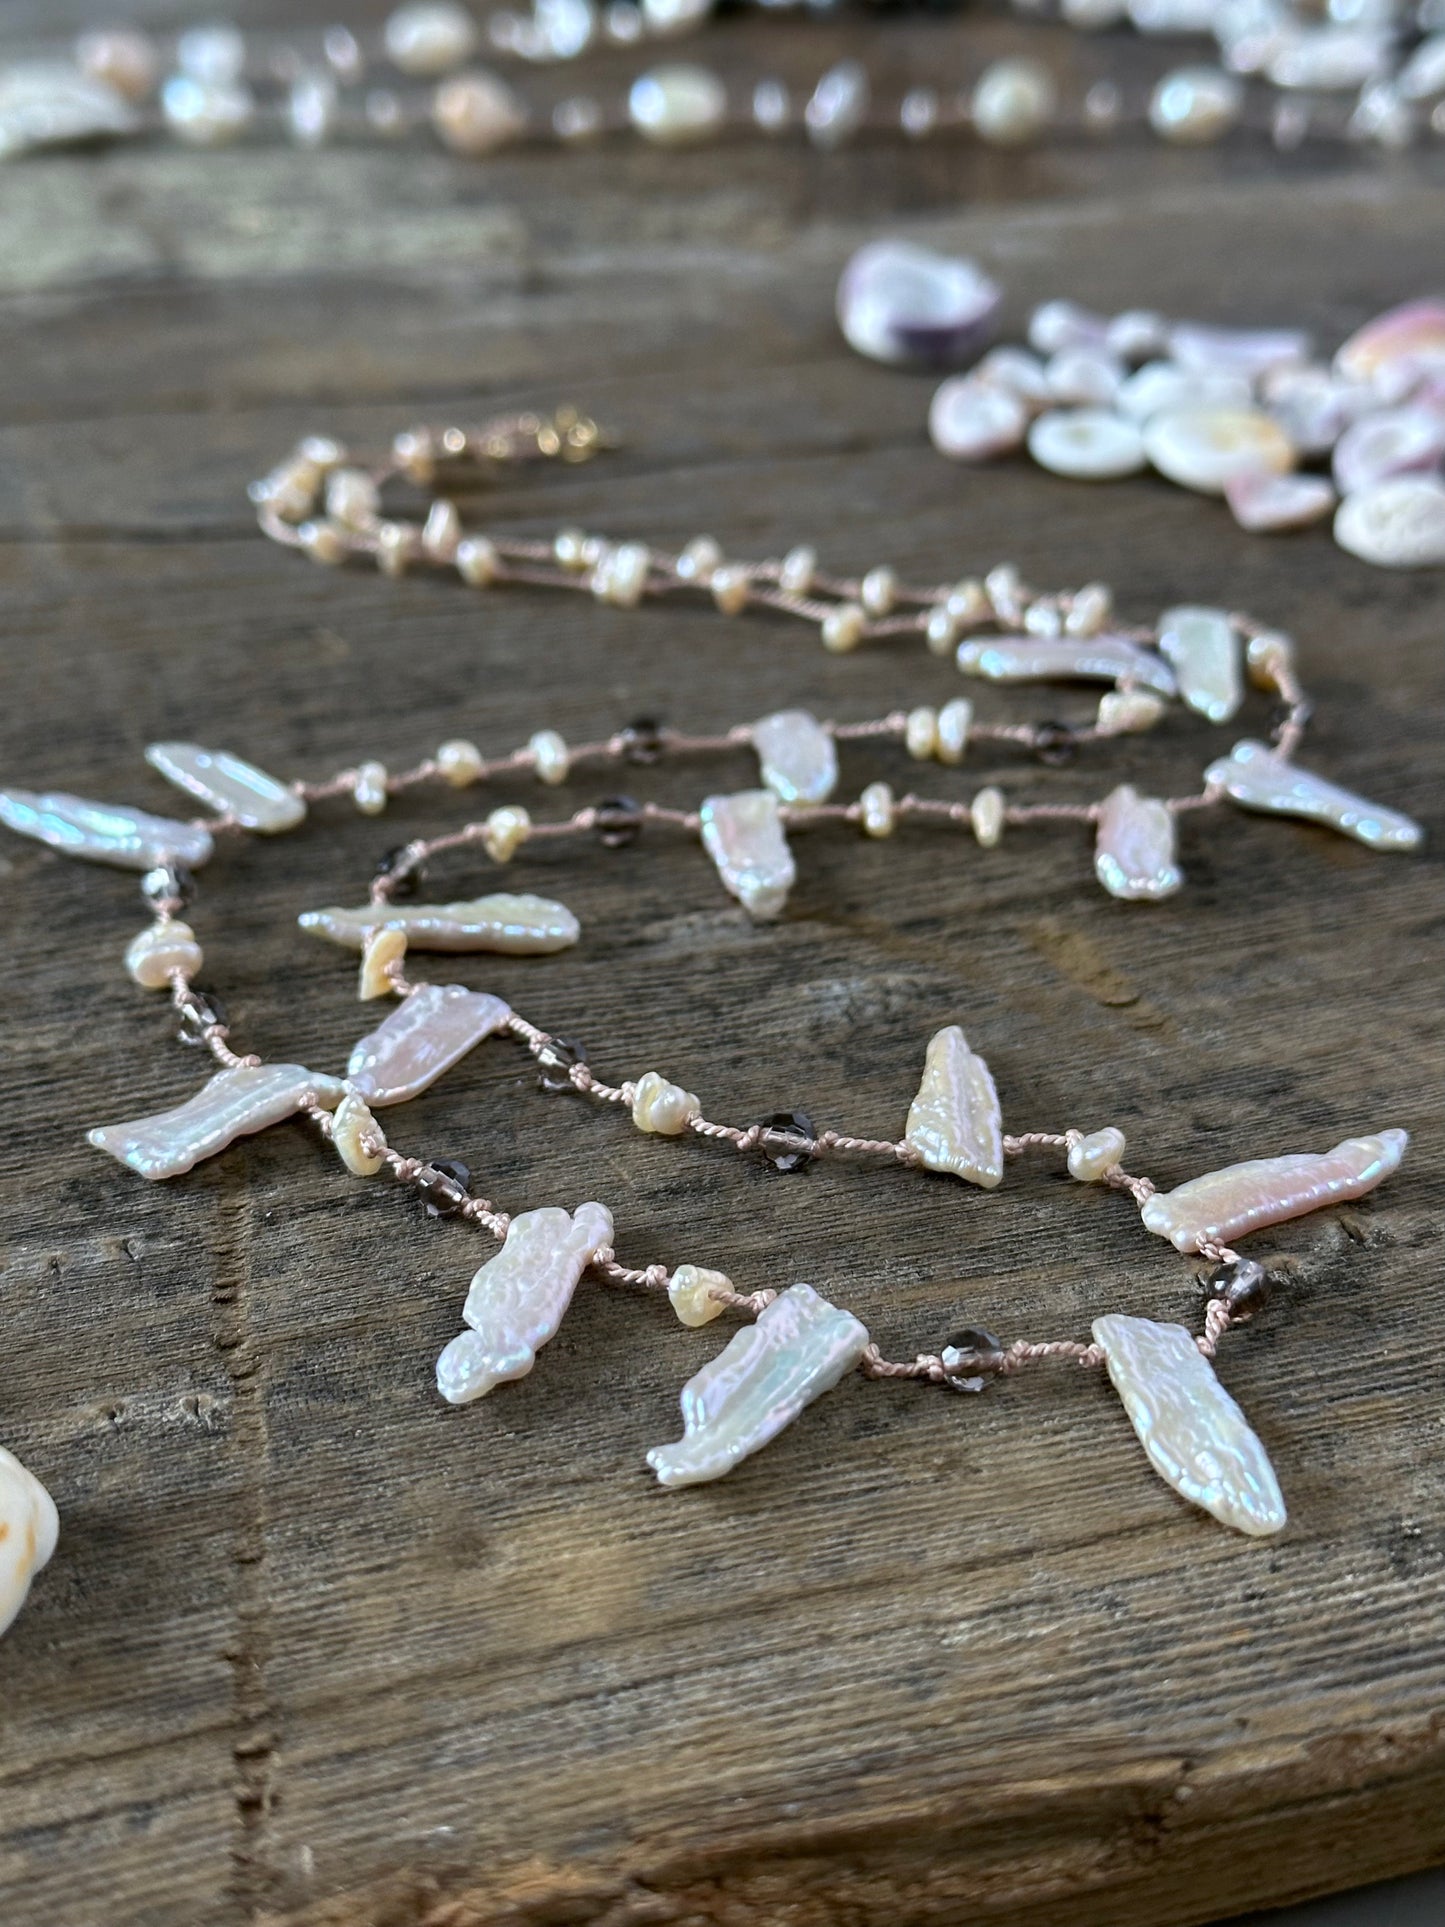 a pinkish silk necklace on a wooden background with odd shaped pearls and brown faceted beads. there are some puka shells in the upper right corner and lower left edg of the frame